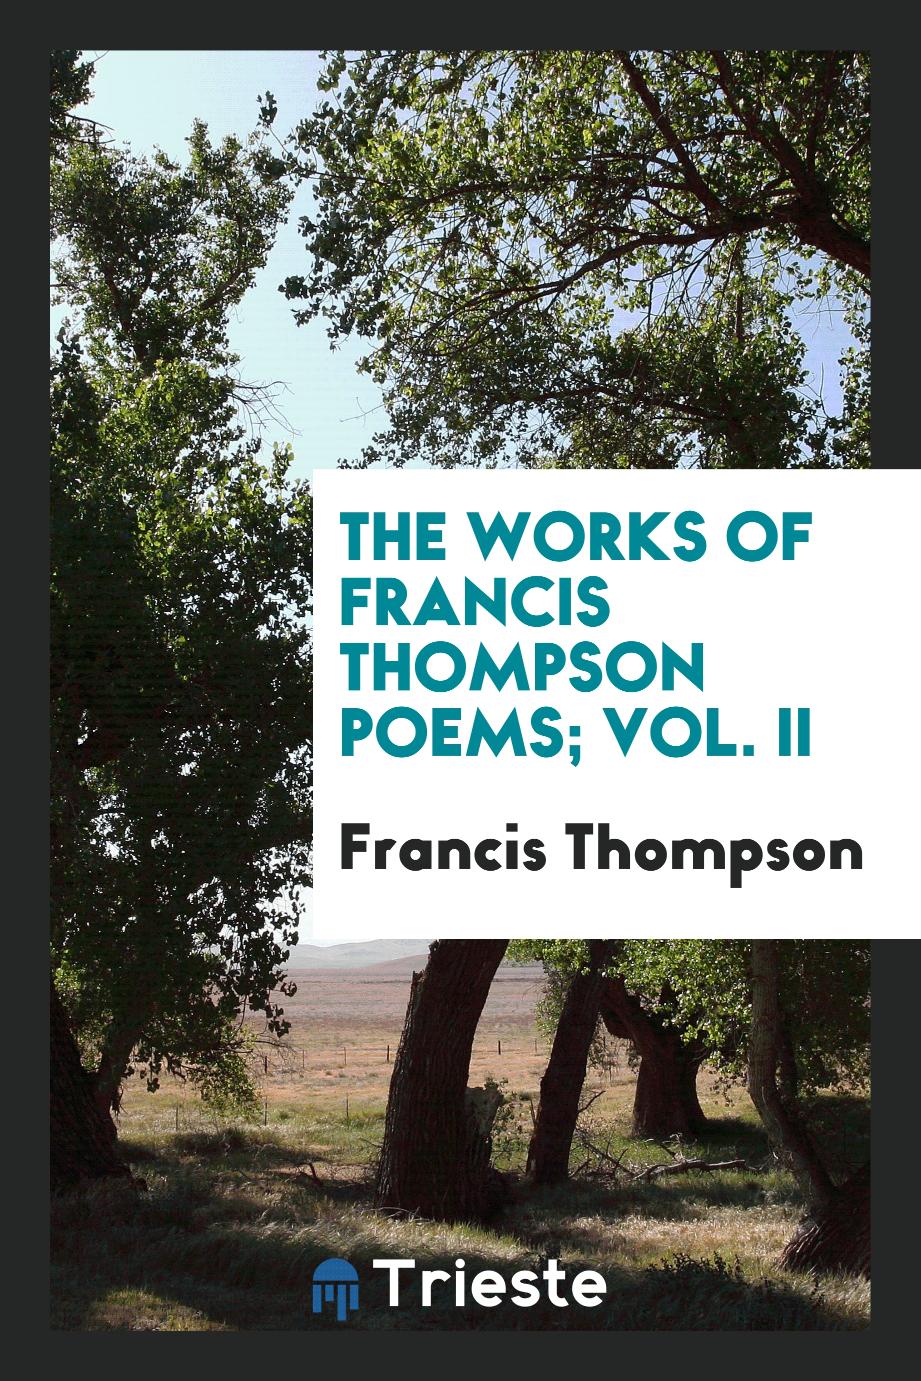 The works of Francis Thompson poems; Vol. II